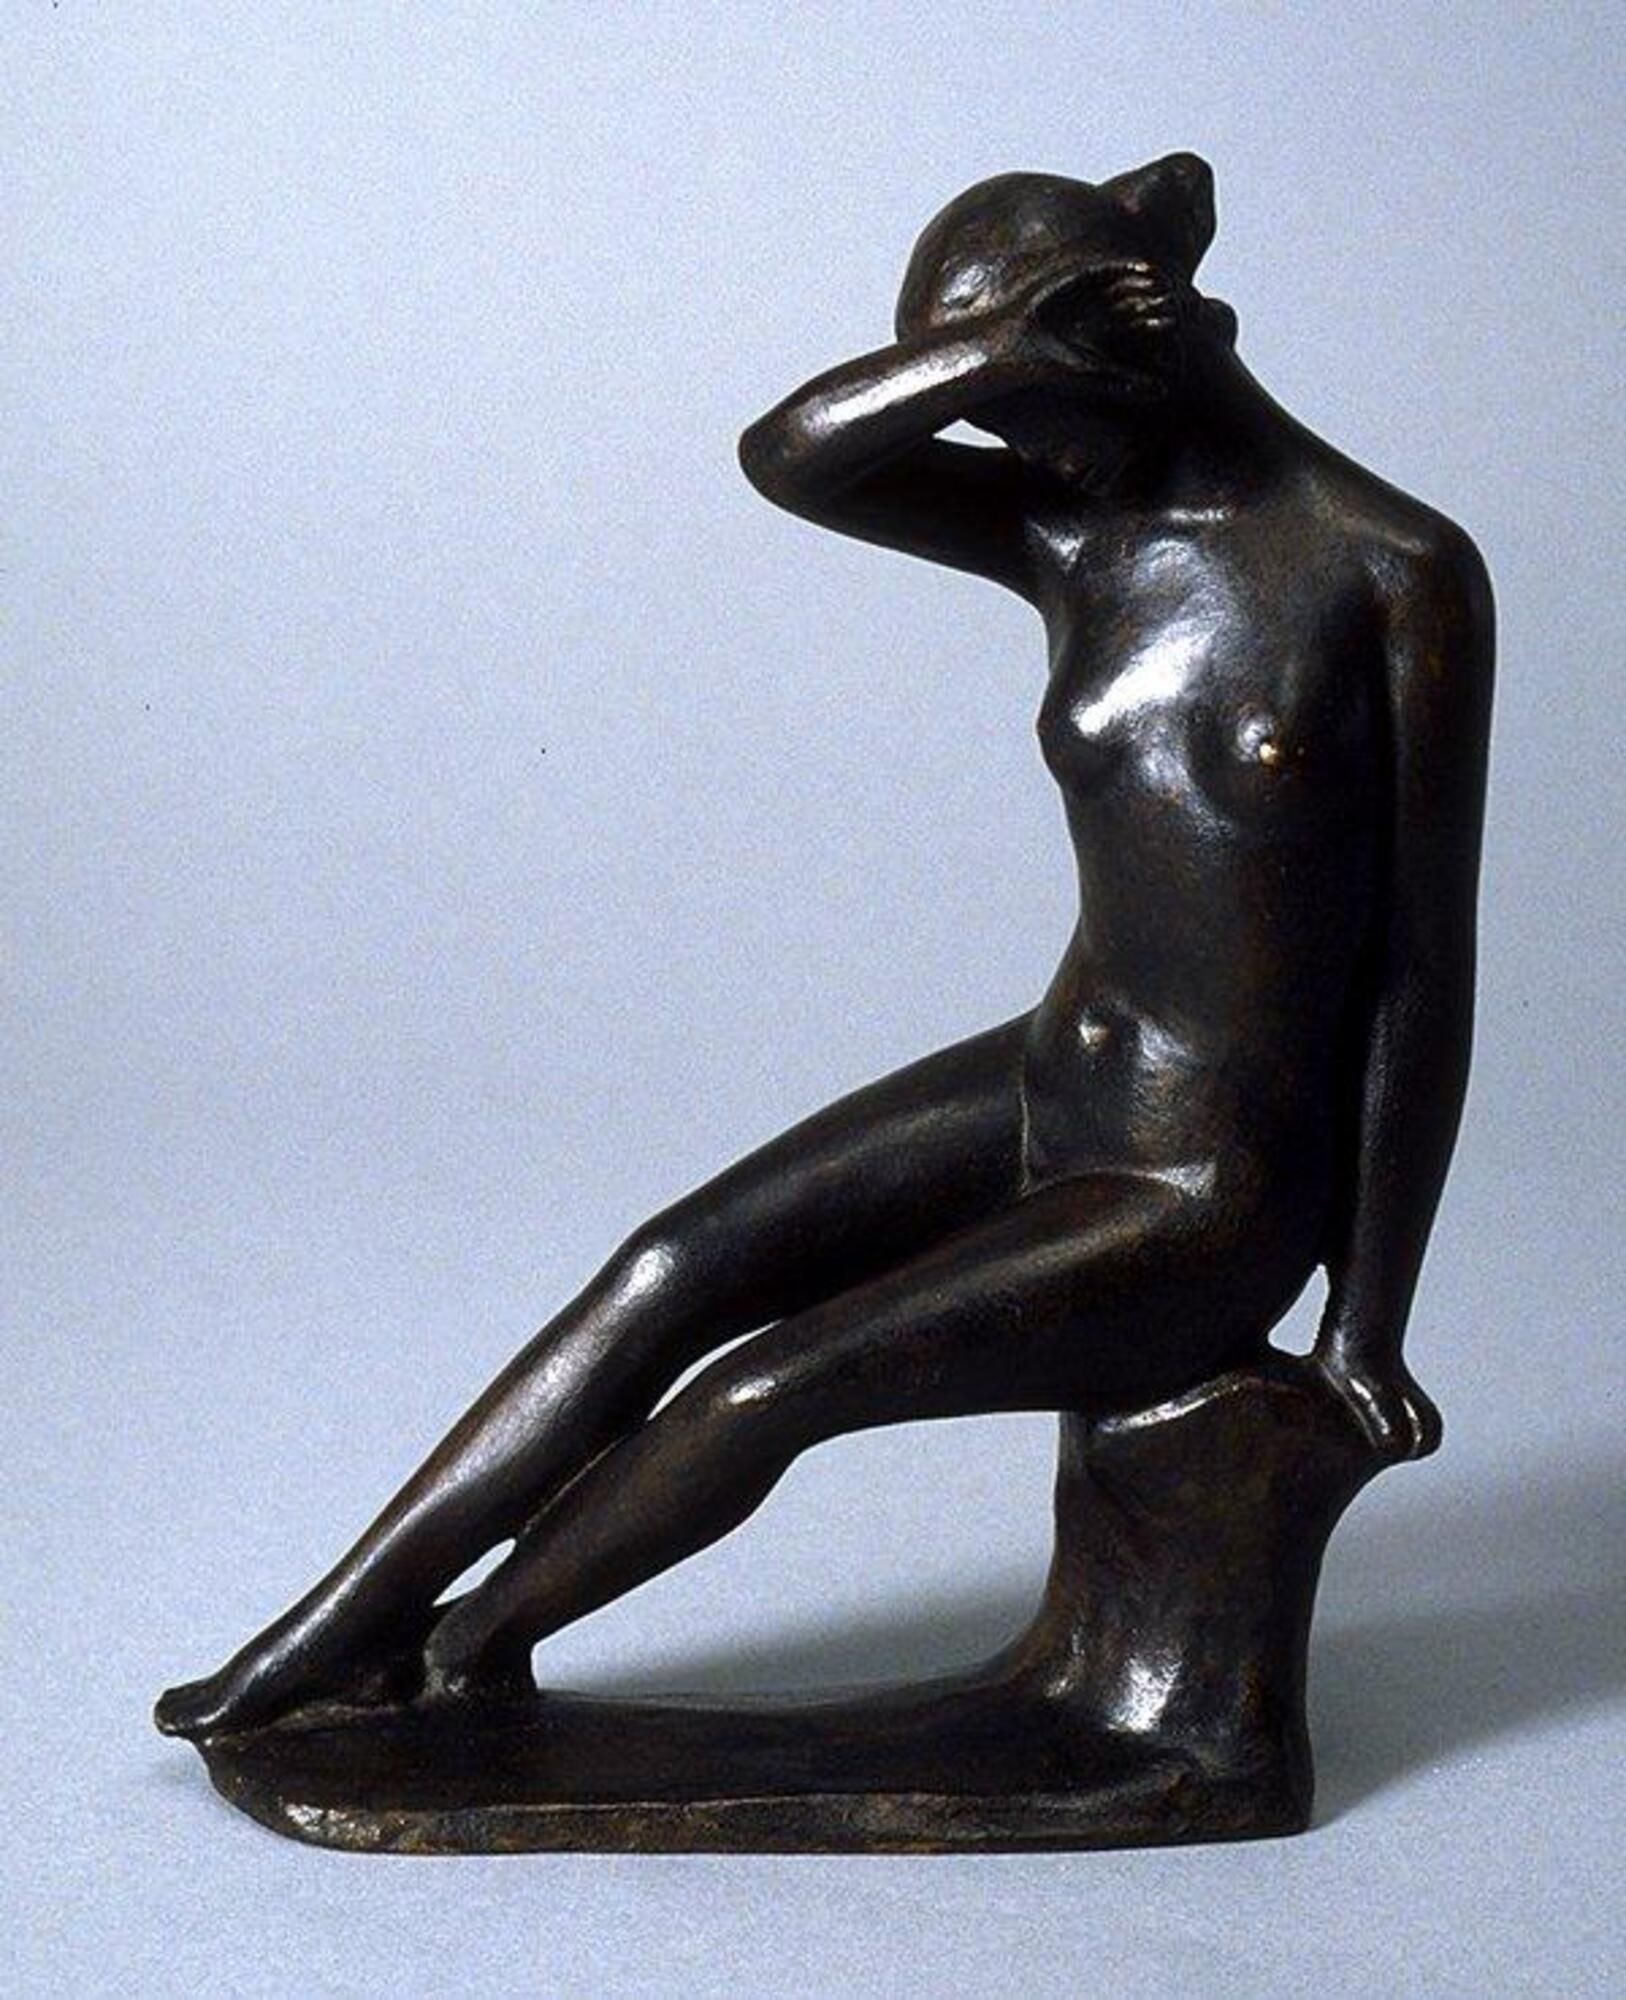 This is a 21cm tall bronze sculpture of a nude female figure seated on a stump-like form with her legs extending out in front of her and crossed at the ankles. She leans the weight of her body on her left arm, as her left hand grasps the edge of the stump. Her right arm is bent and raised, with the back of her hand resting against the left side of her head.  She is gazing downward and her arm seems to be shielding her face. Her hair is pulled back and gathered in a knot. The patina is dark brown and the metal surface has a uneven appearance.